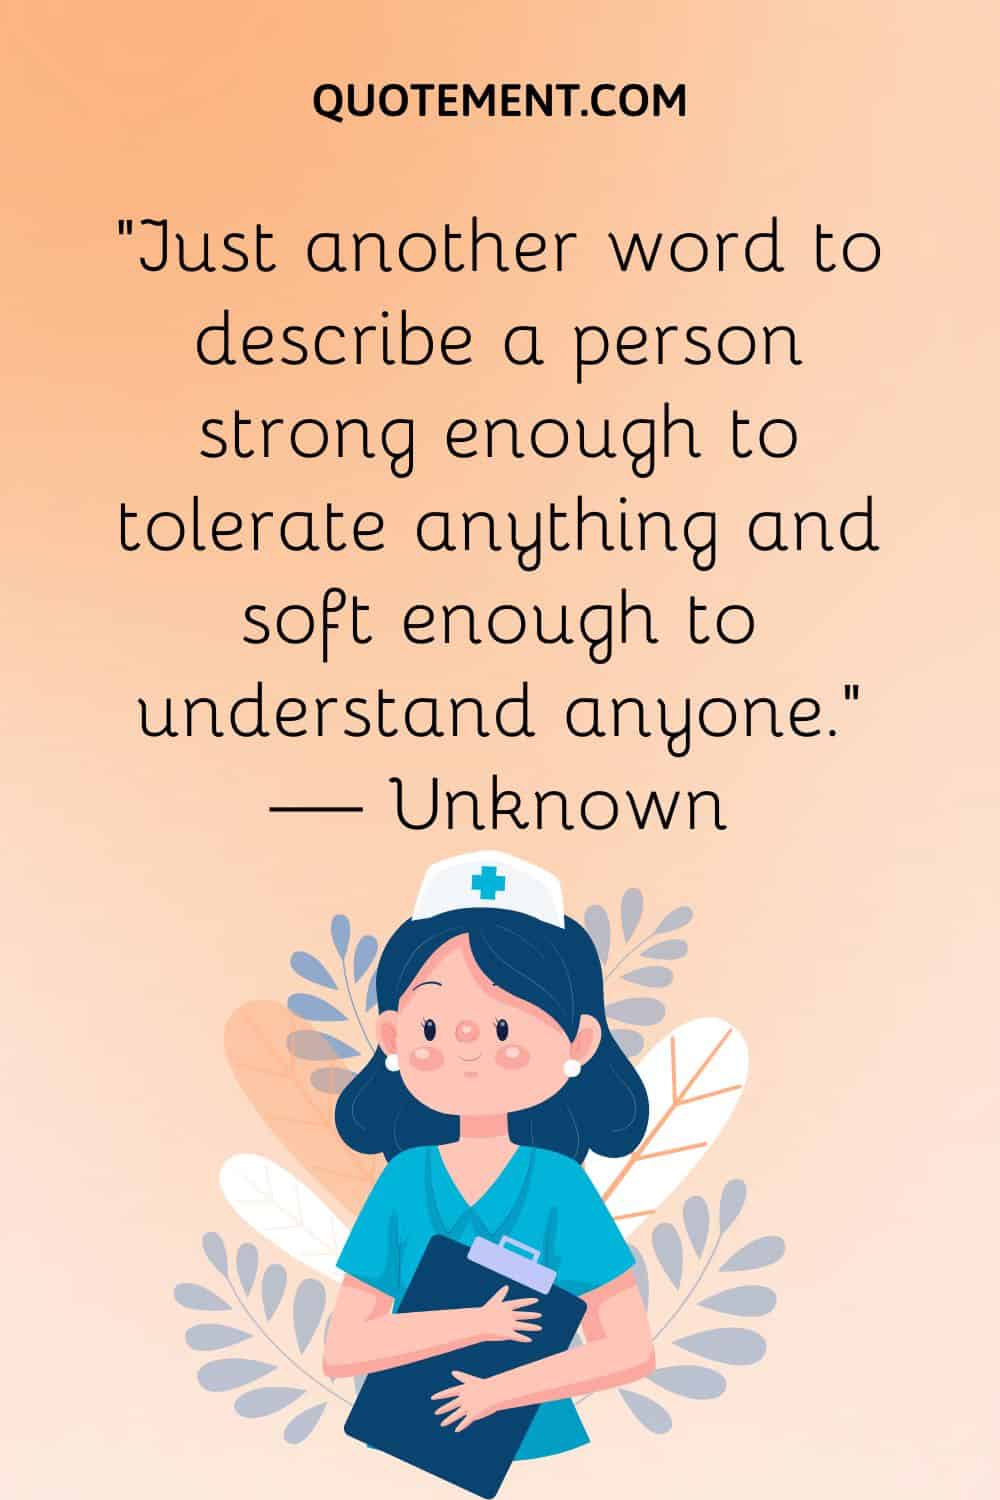 “Just another word to describe a person strong enough to tolerate anything and soft enough to understand anyone.” — Unknown